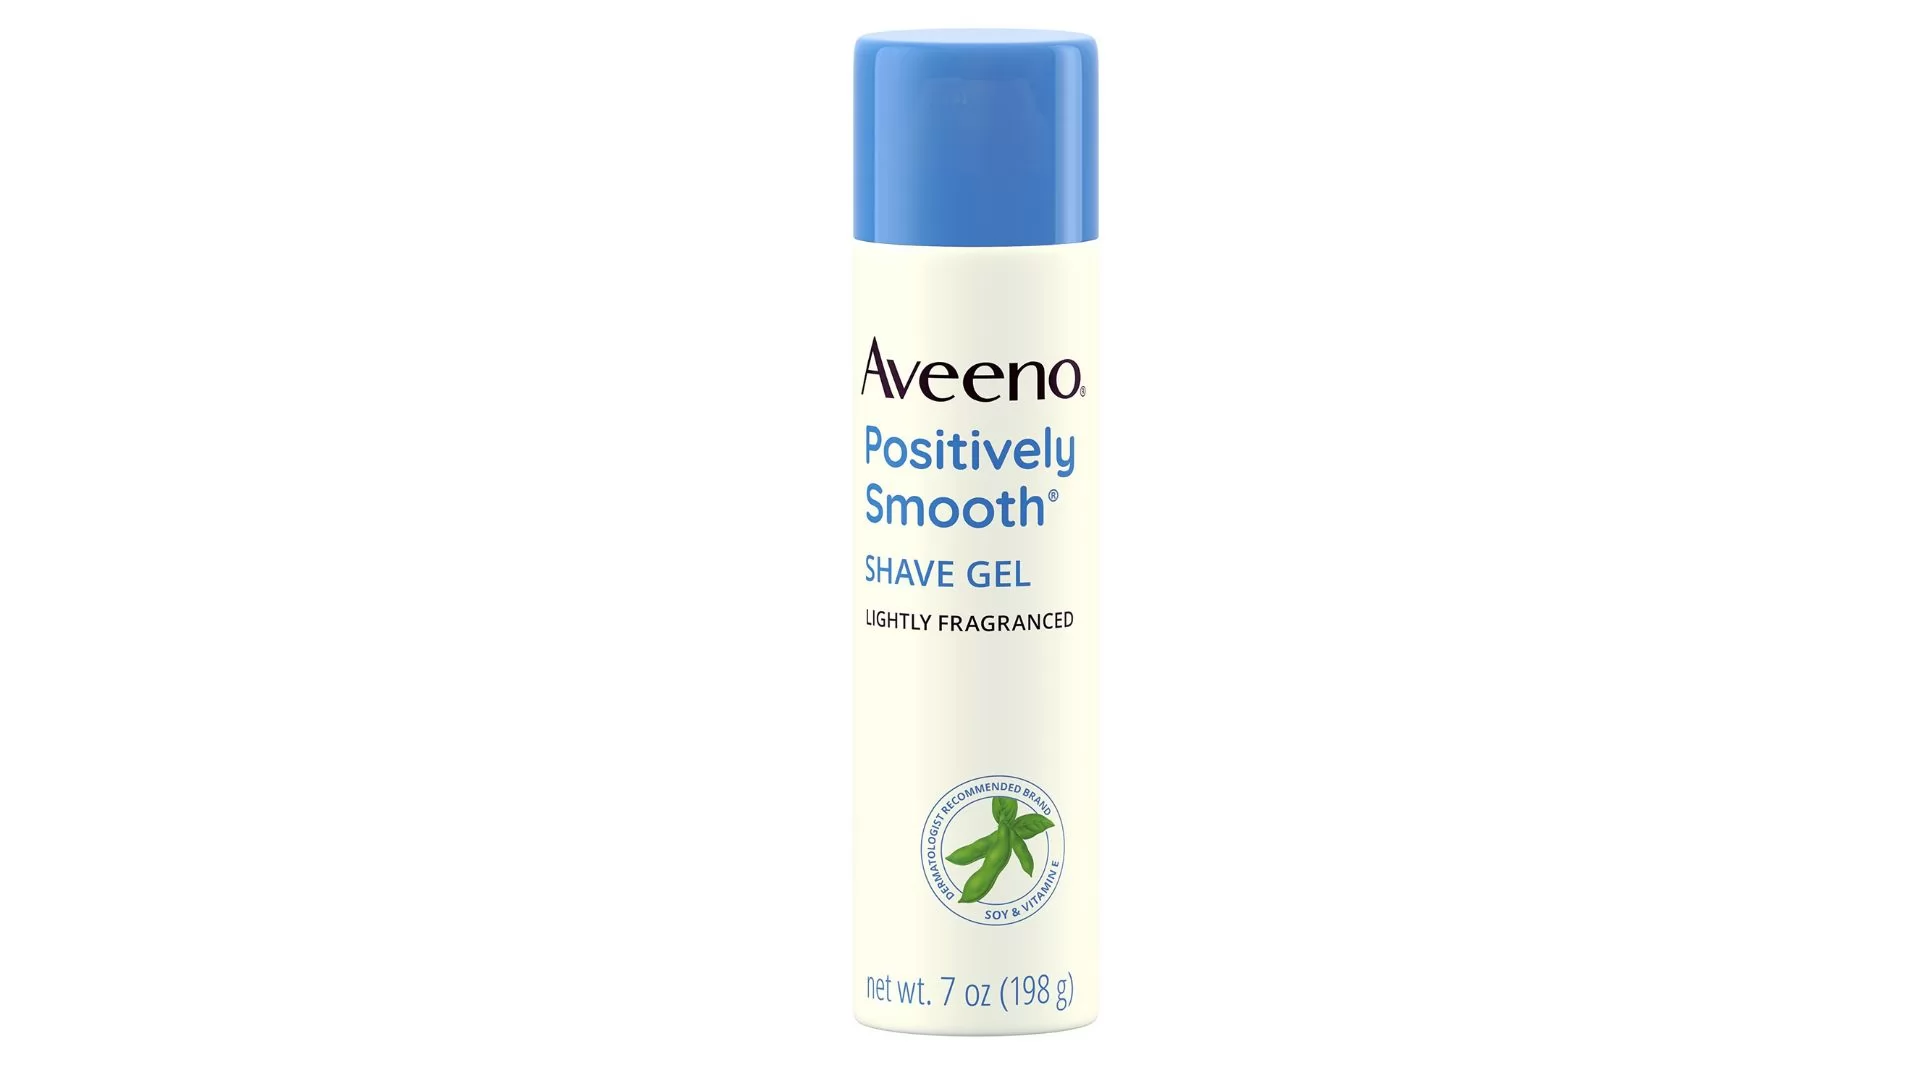 Aveeno Positively Smooth shave gel 